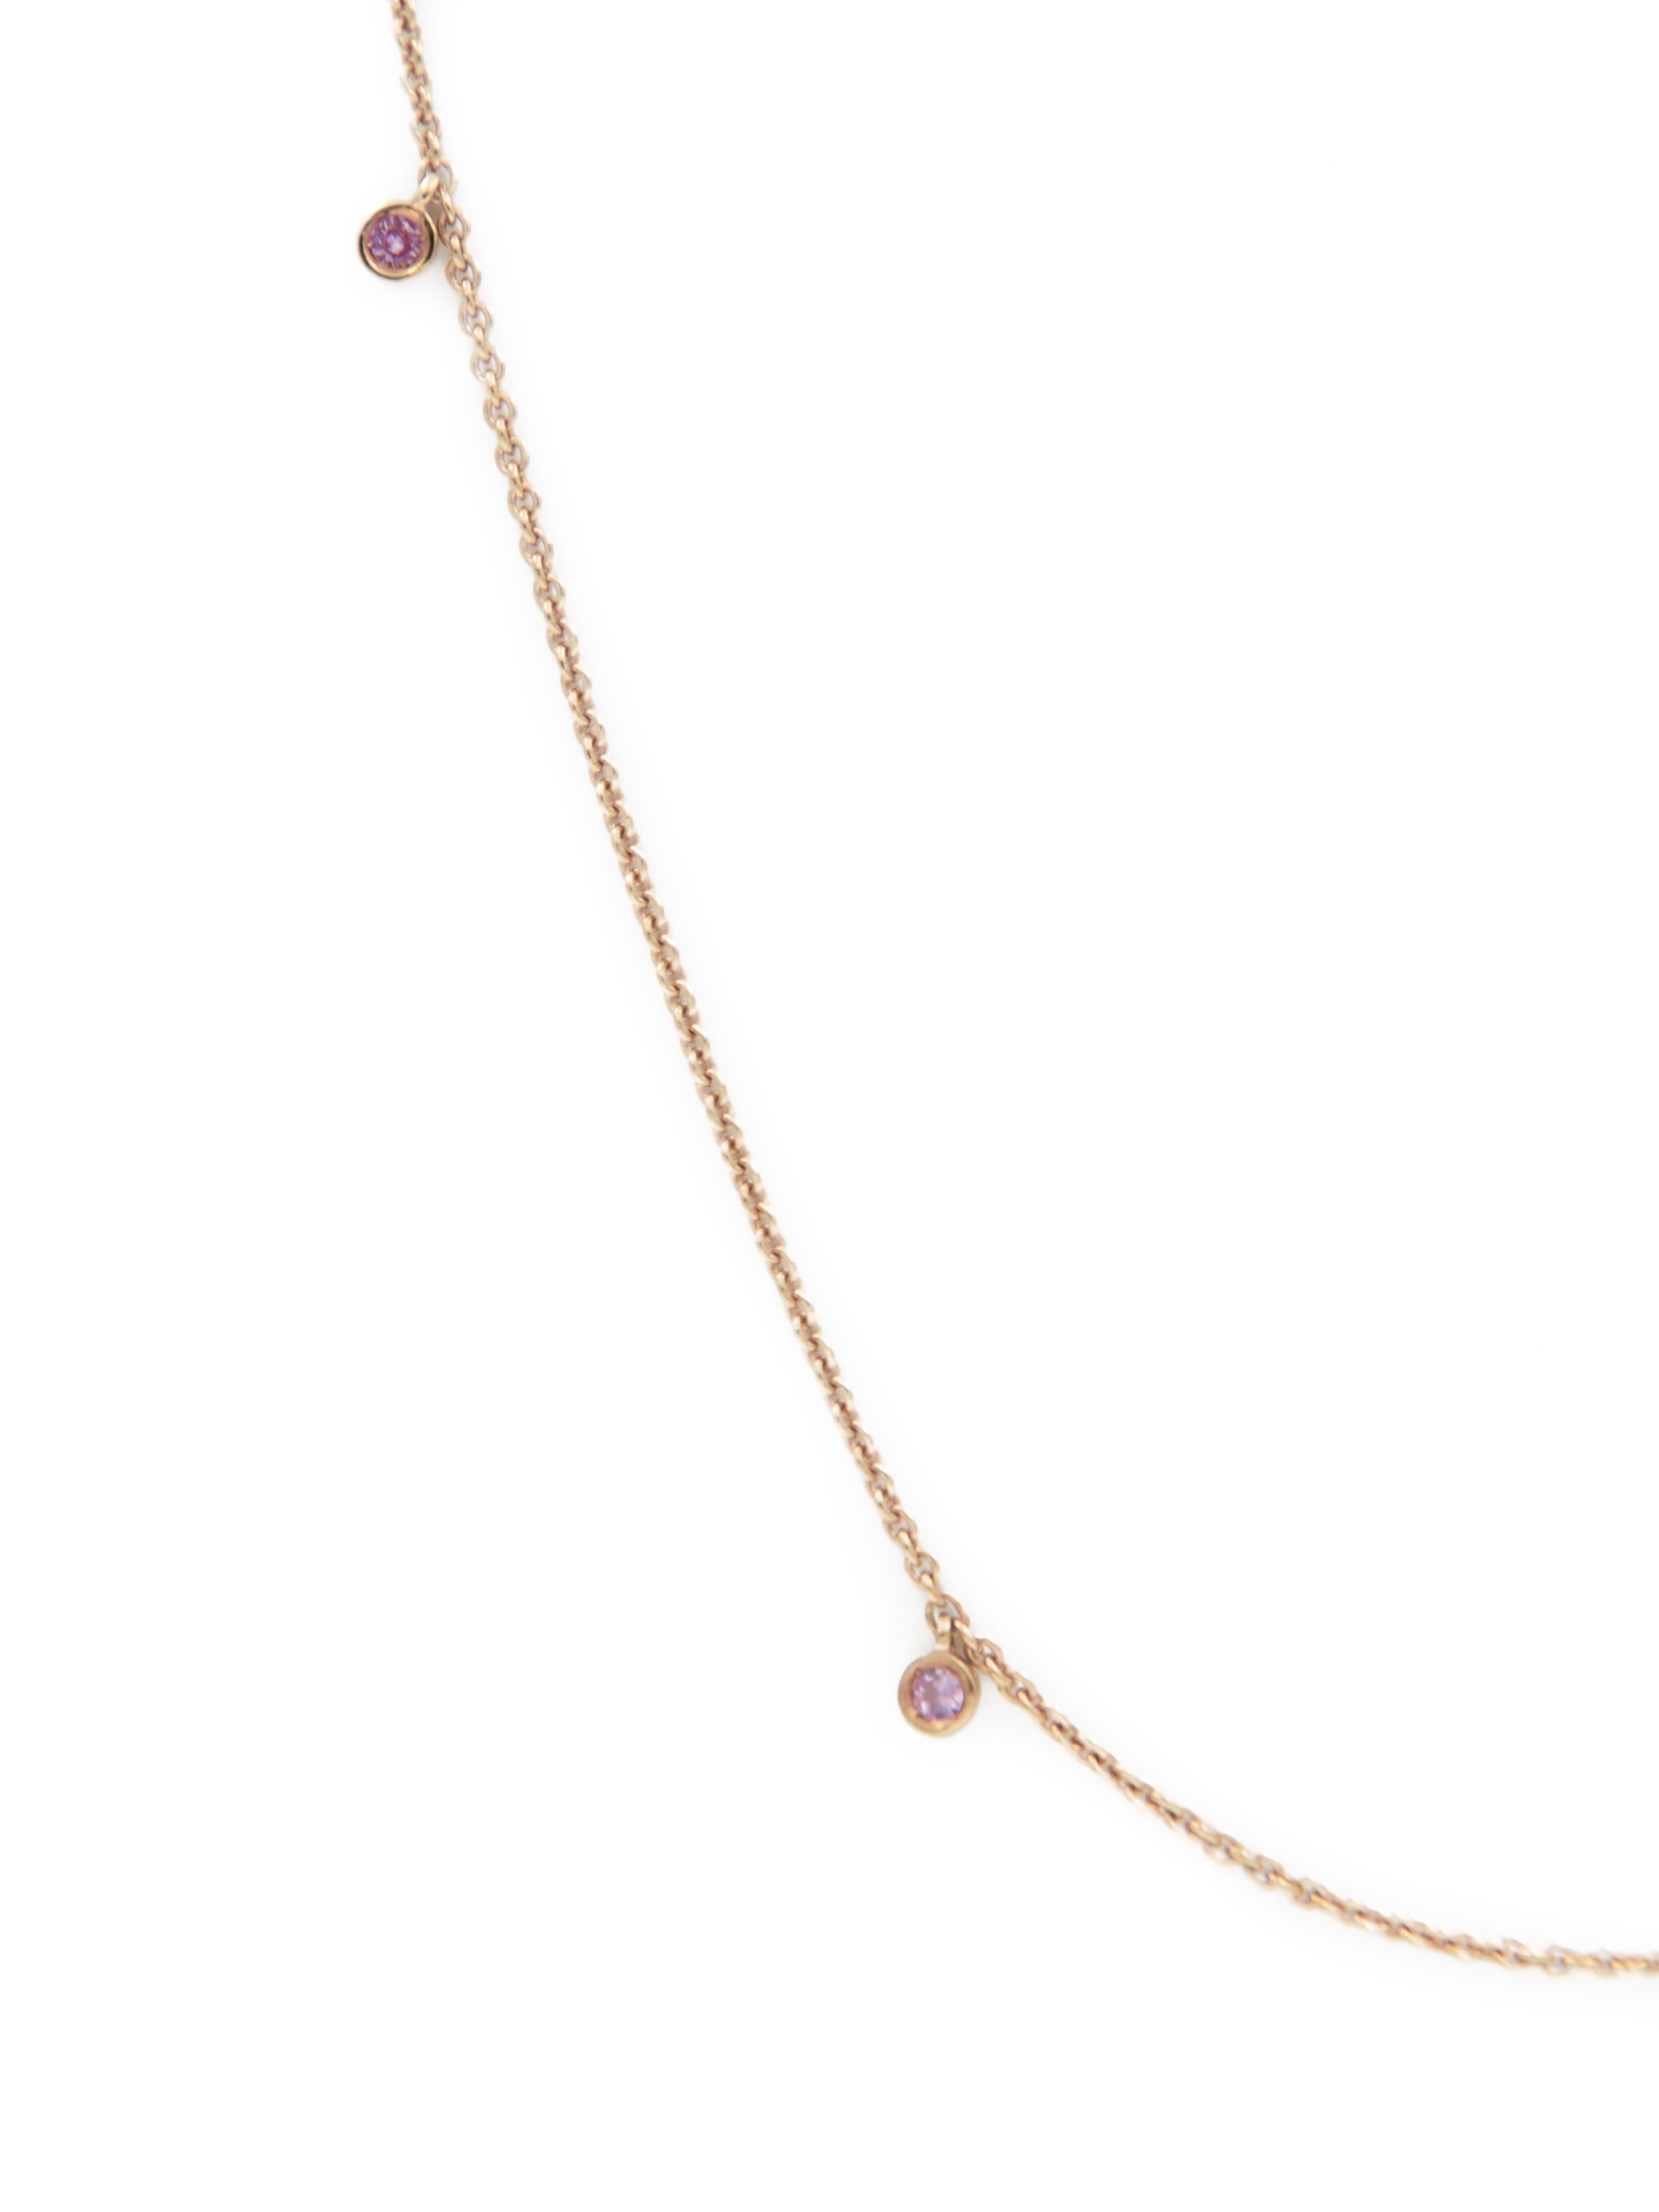 Contemporary Julia-Didon Cayre 18 Karat Yellow Gold Pink Sapphire Chain Necklace For Sale